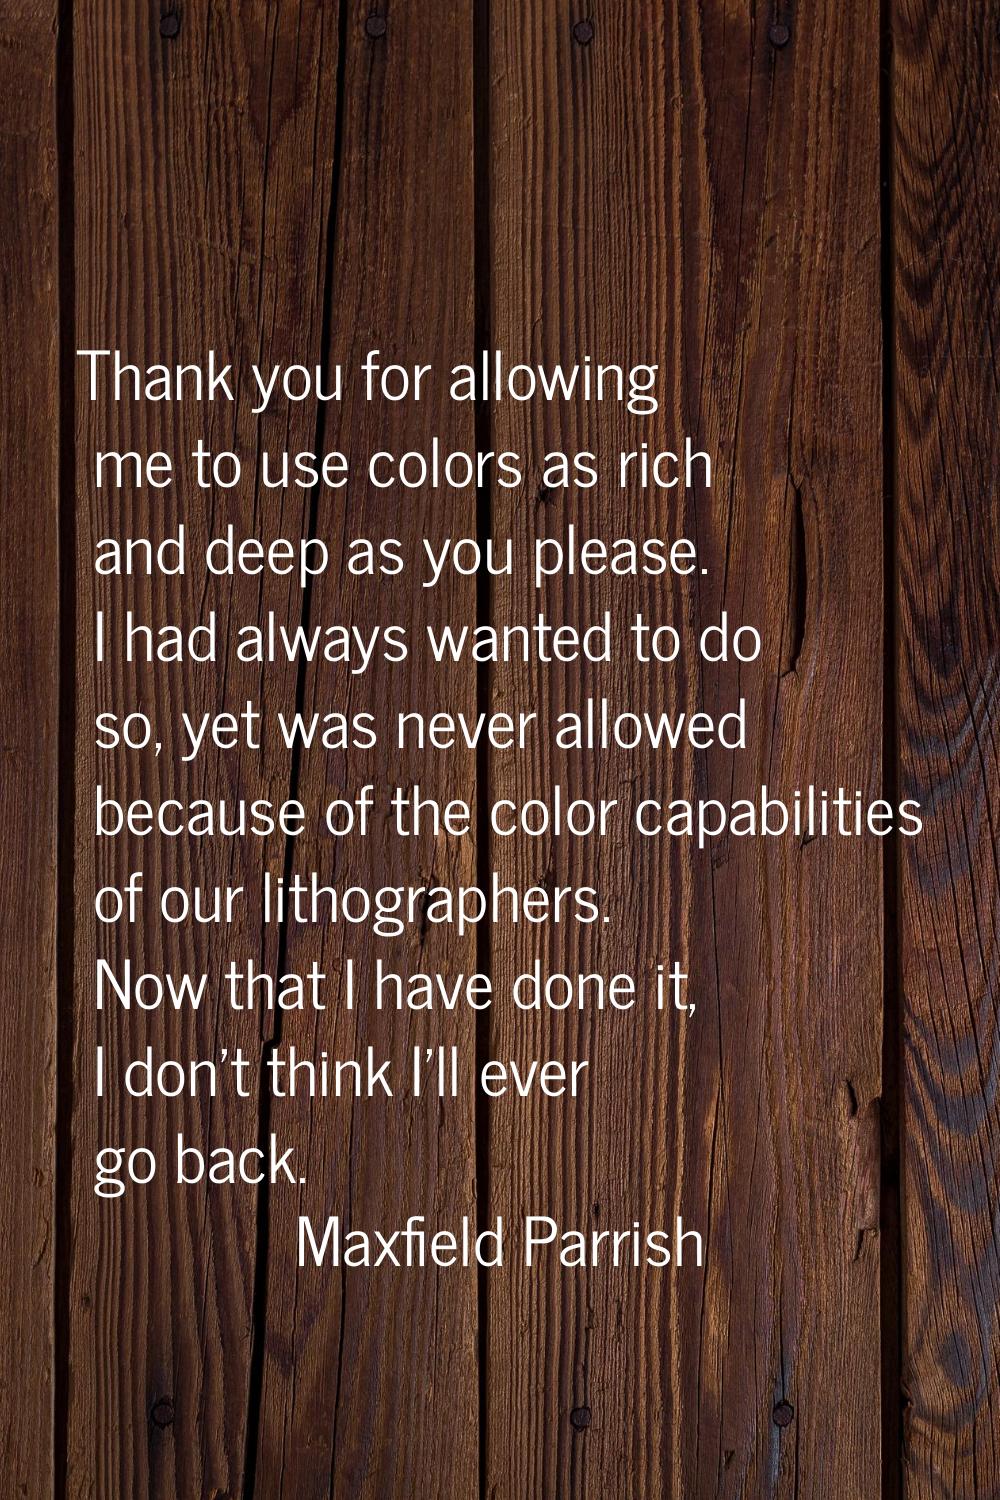 Thank you for allowing me to use colors as rich and deep as you please. I had always wanted to do s